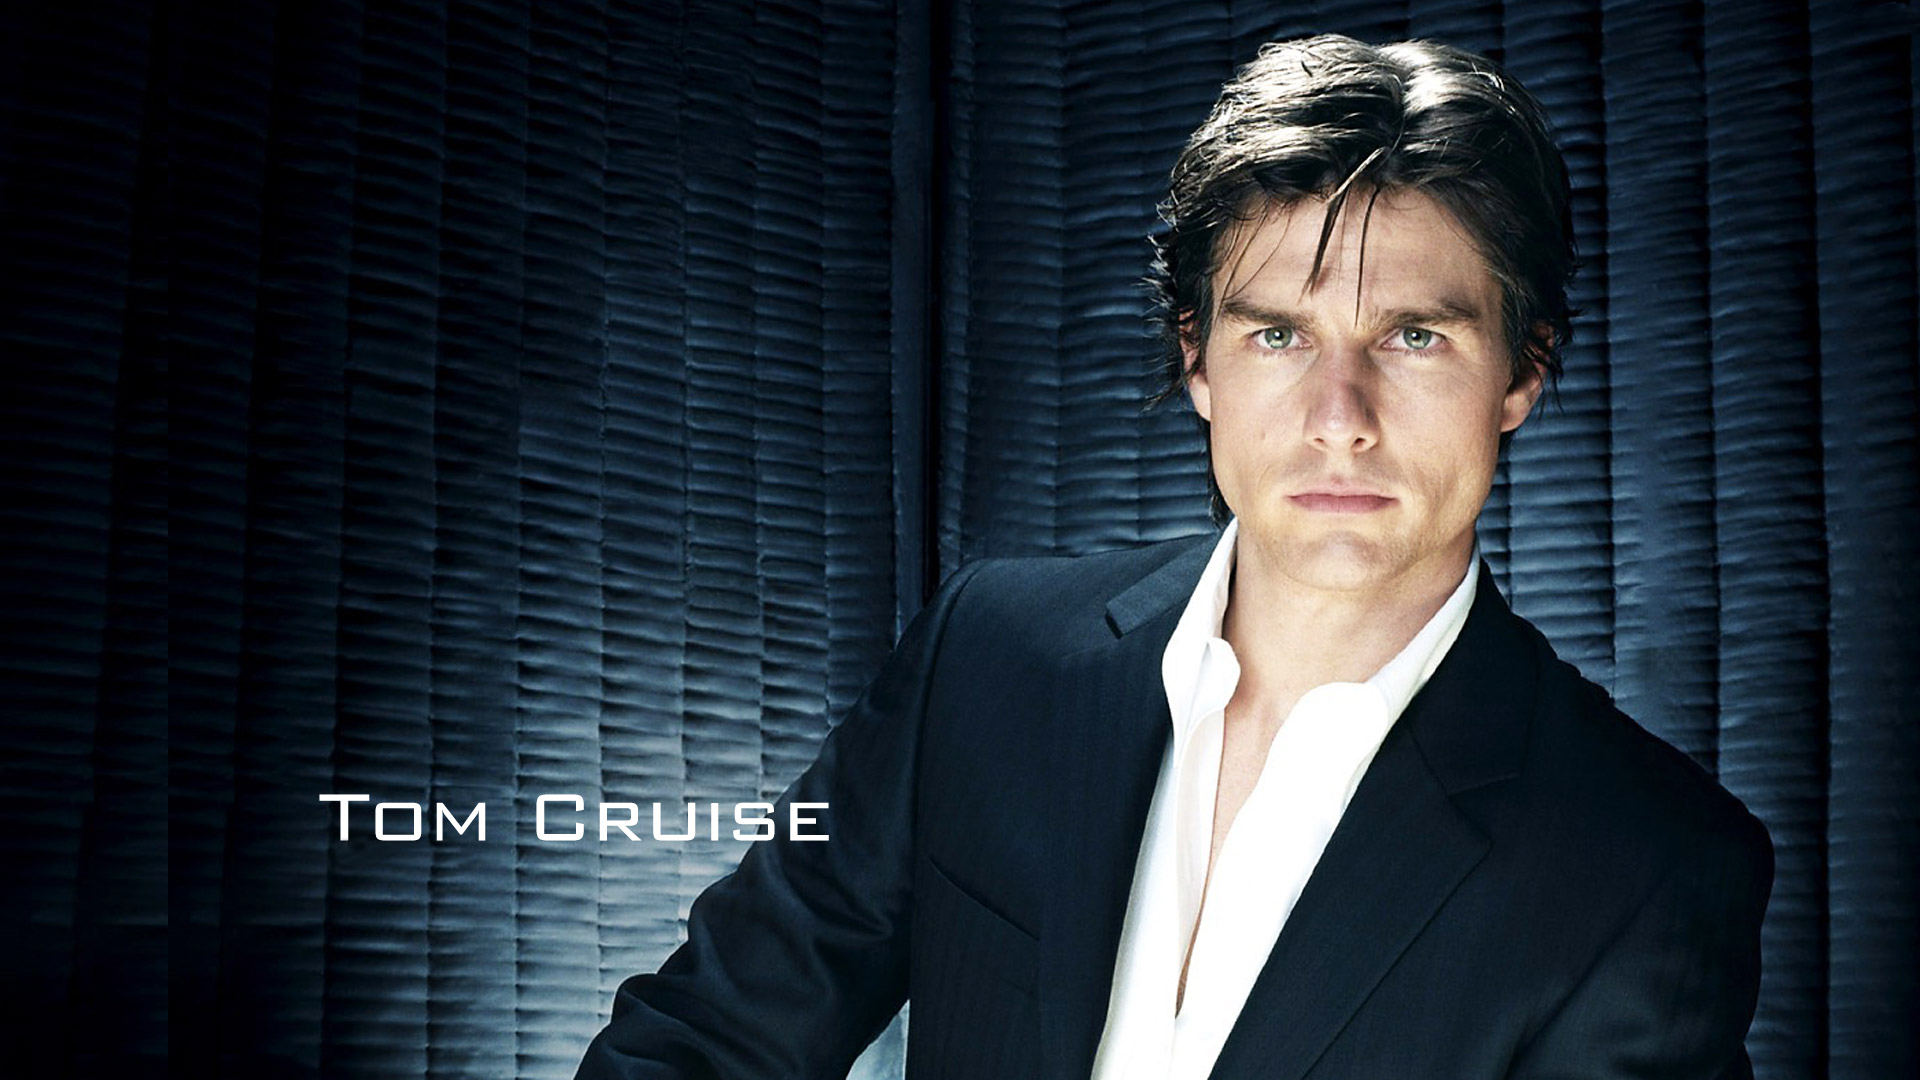 Tom Cruise Wallpaper High Resolution And Quality